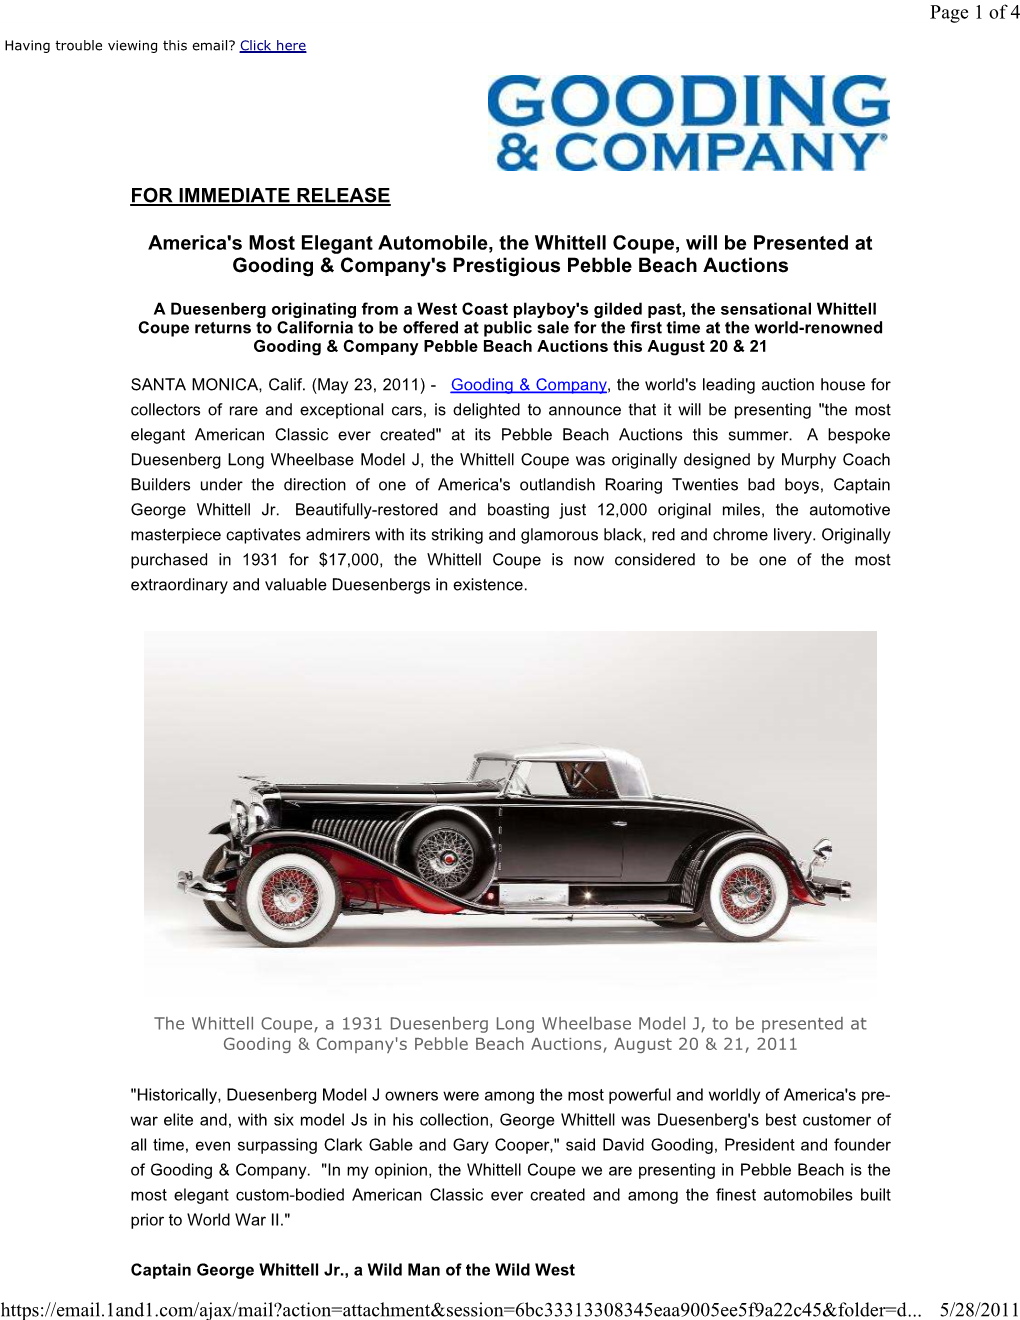 FOR IMMEDIATE RELEASE America's Most Elegant Automobile, the Whittell Coupe, Will Be Presented at Gooding & Company's Presti